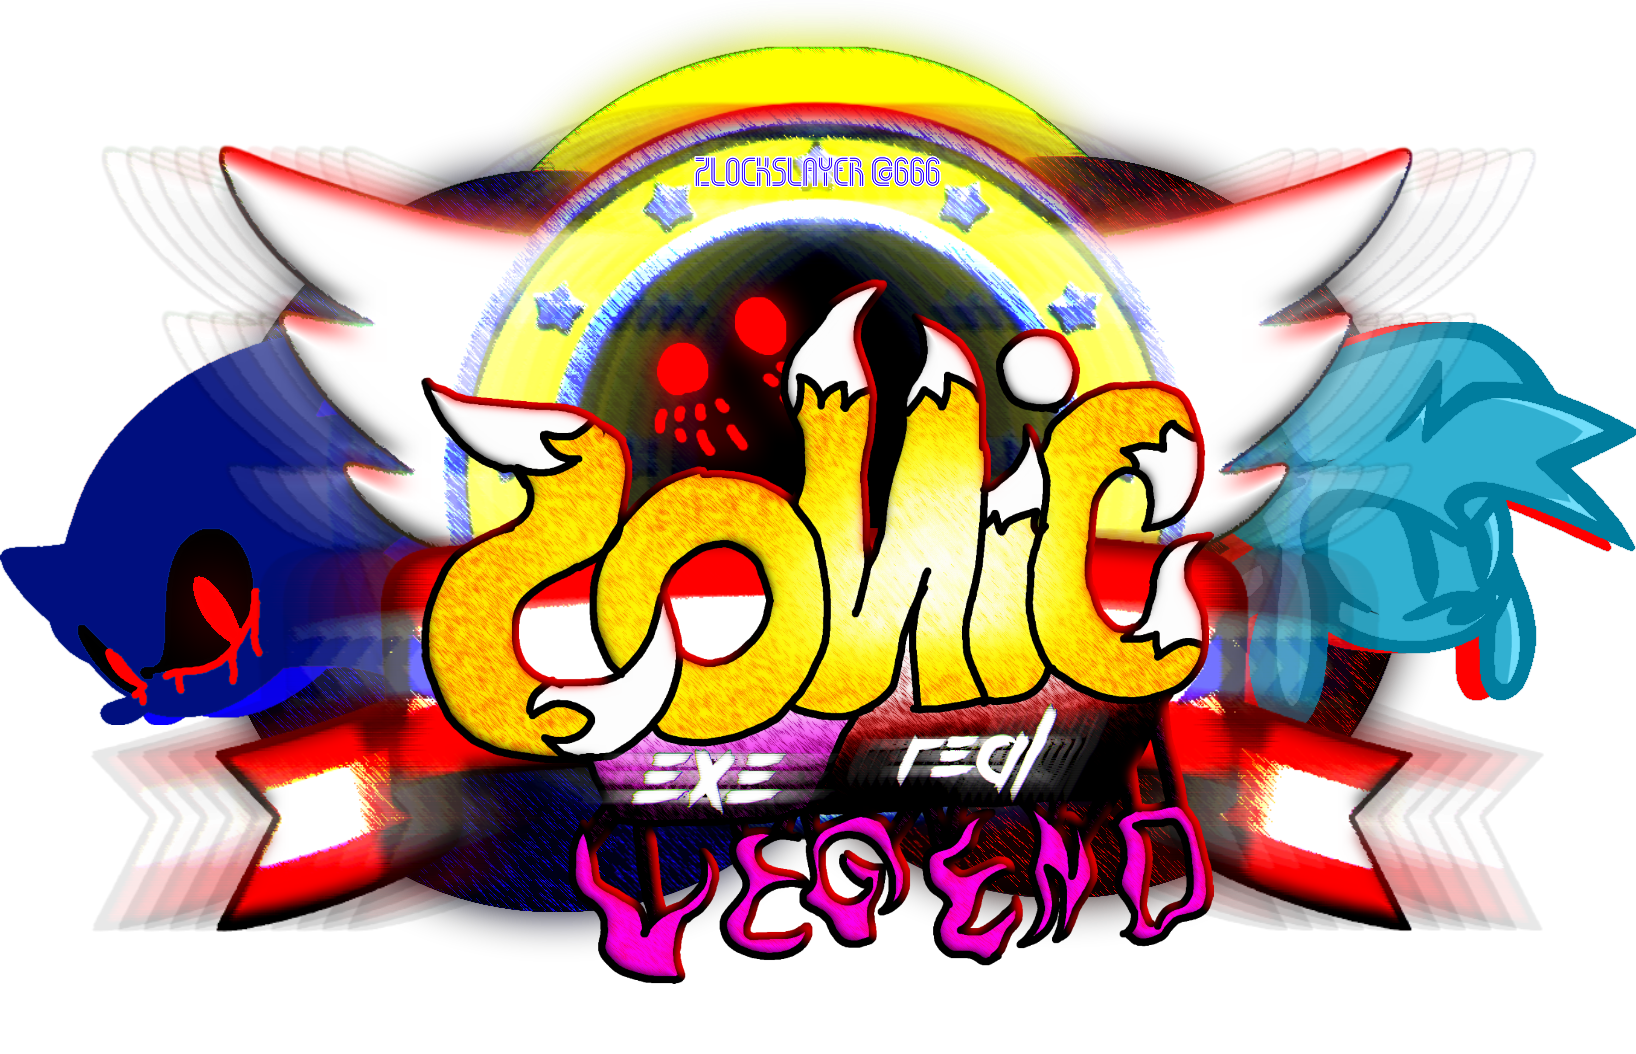 Sonic Exe - song and lyrics by The Virtual Realm